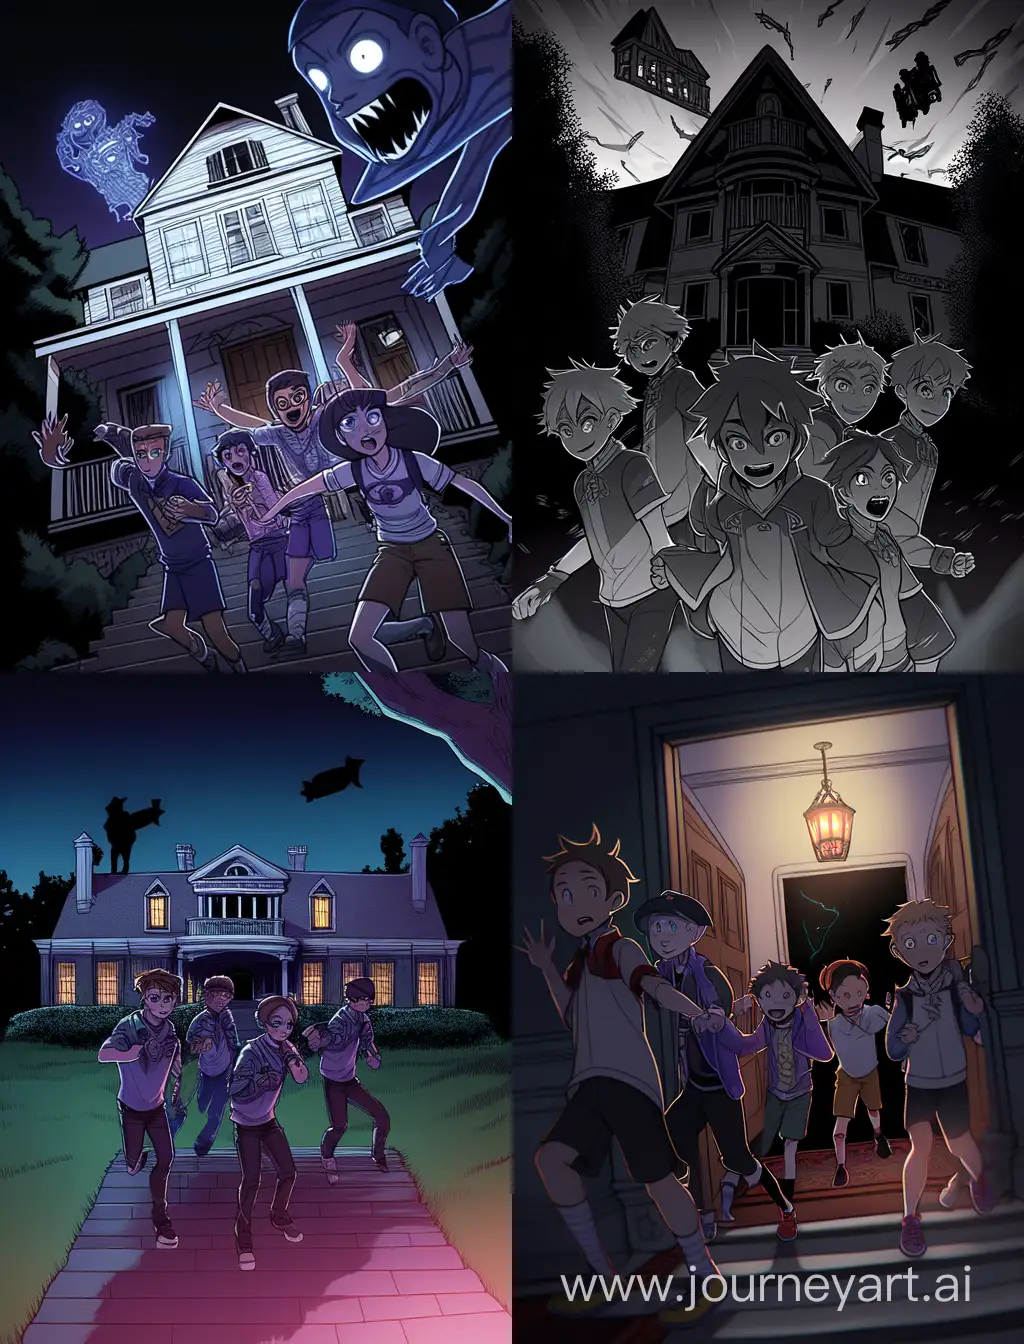 A group of curious teenagers, led by Tom, approach the house. They look excited yet apprehensive.

Tom: Guys, this is it. The haunted house everyone talks about!